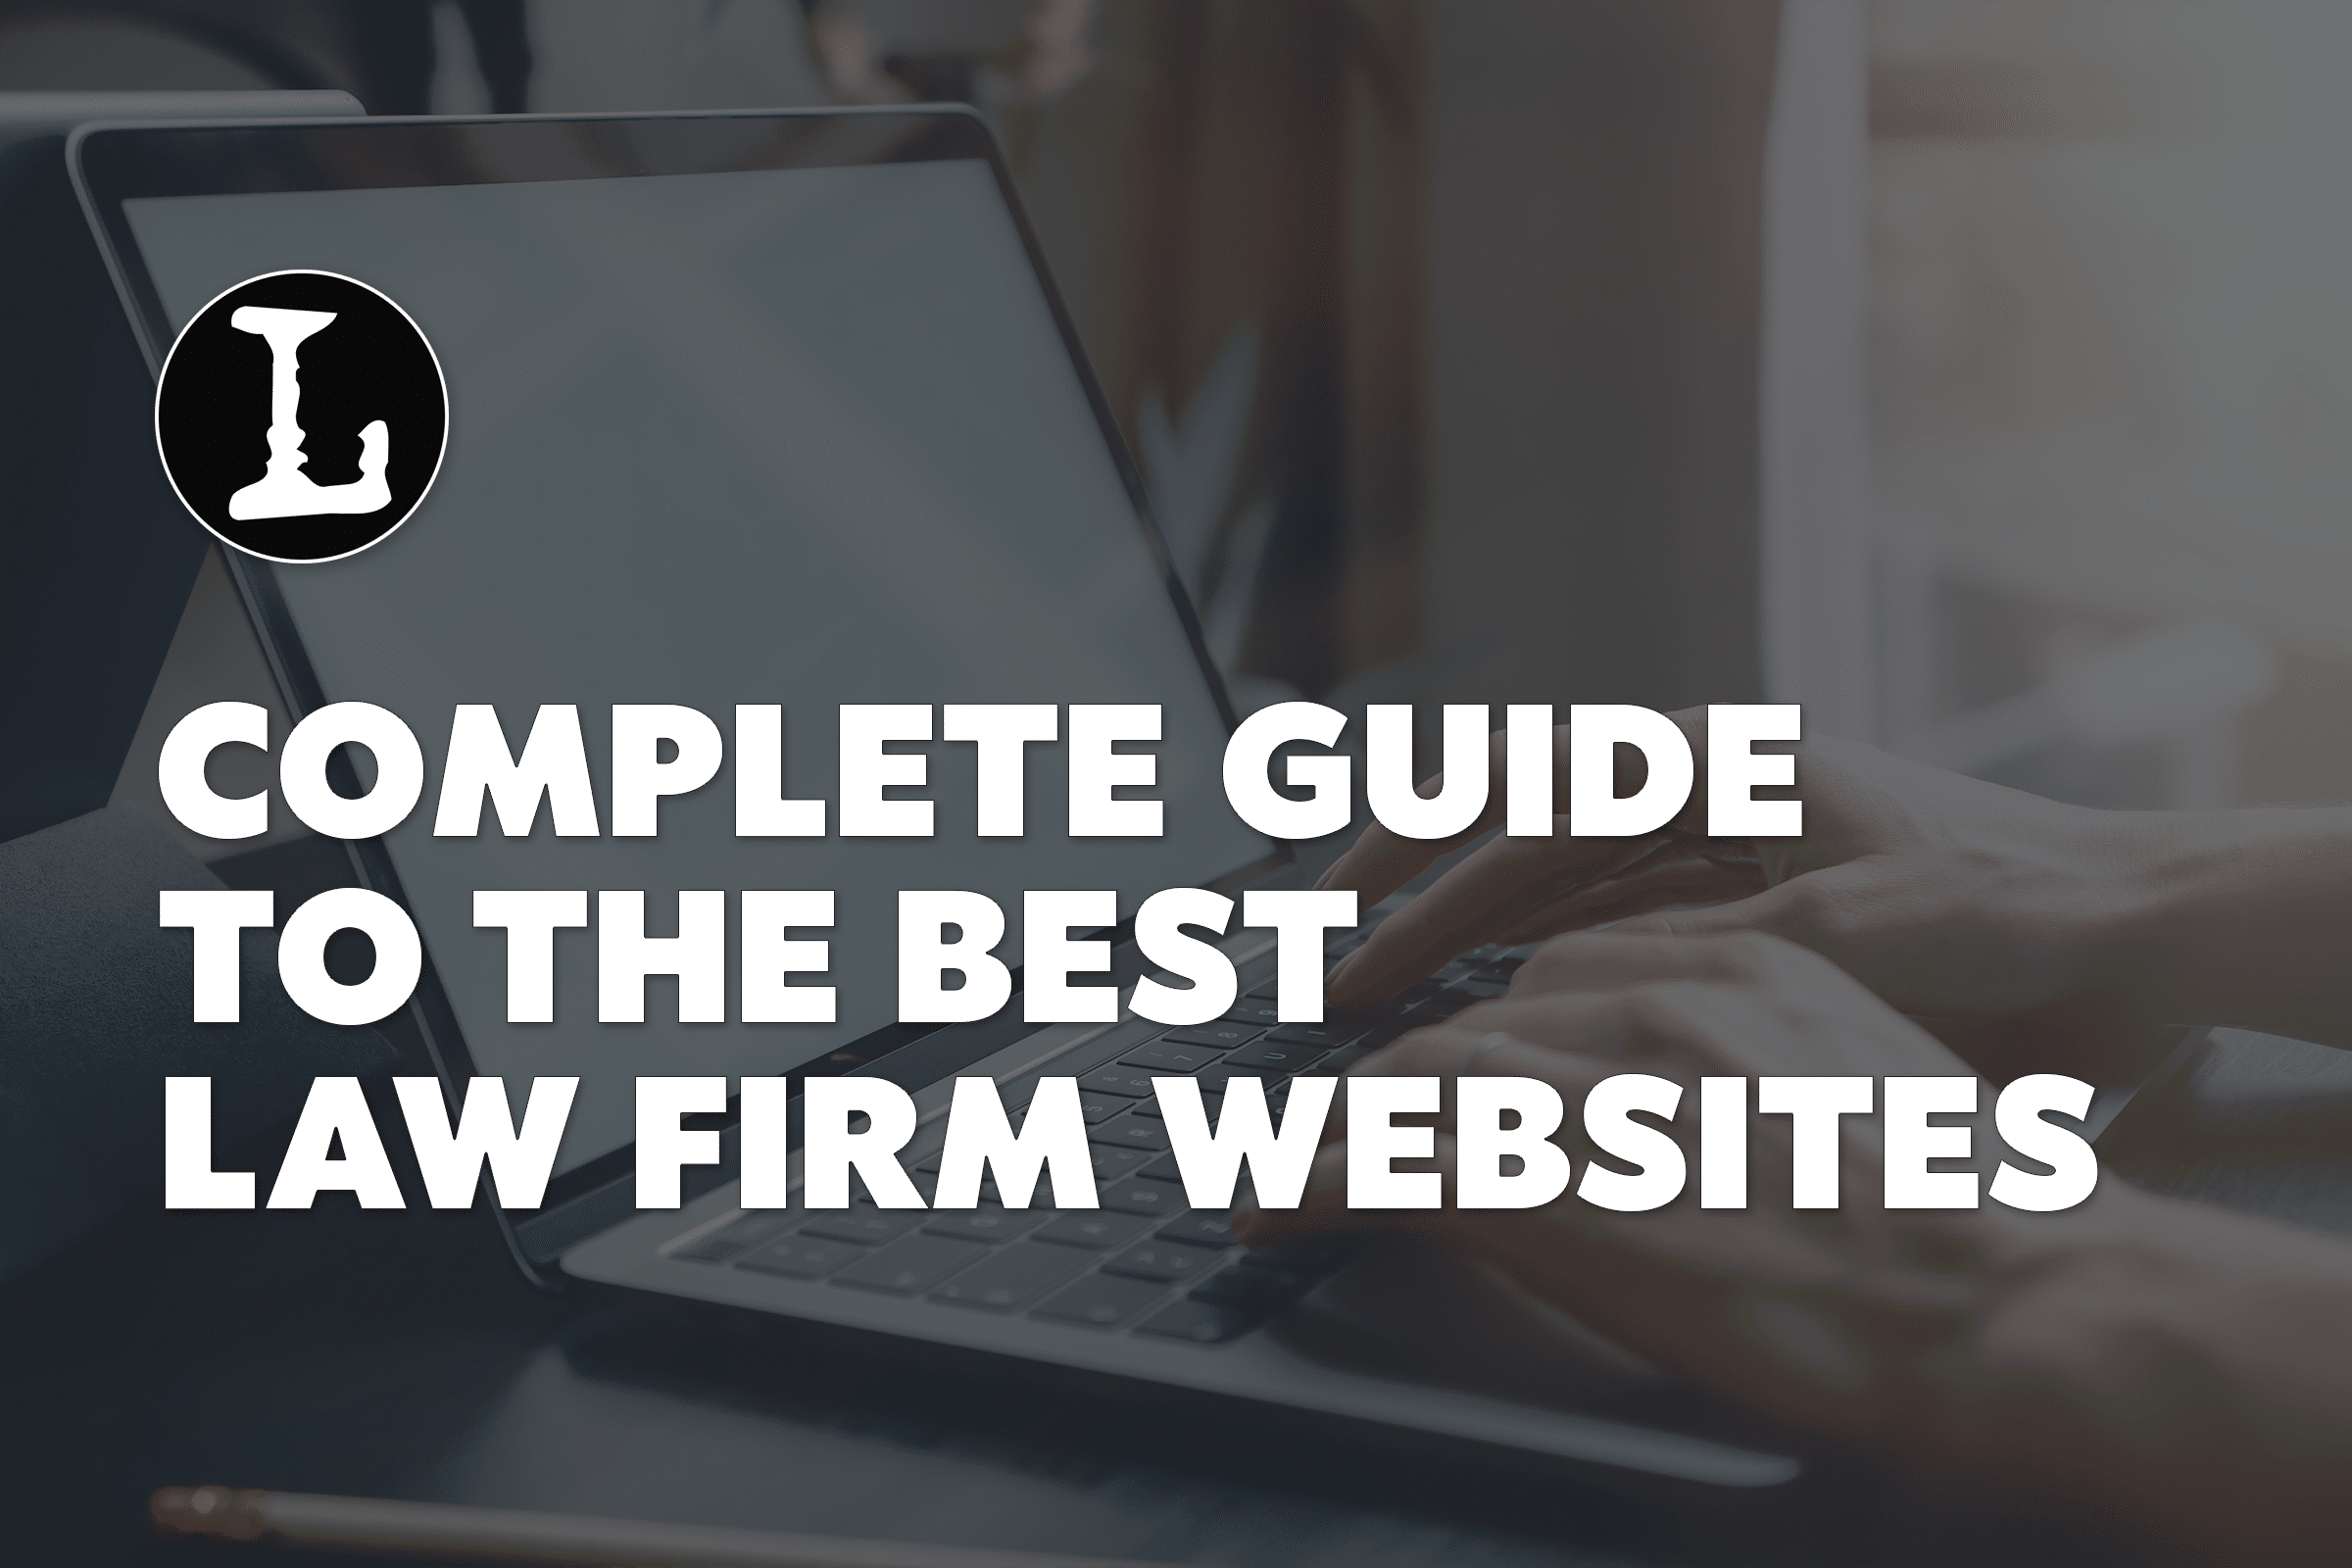 Law Firm Websites A Complete Guide 2019 Lawyerist - 